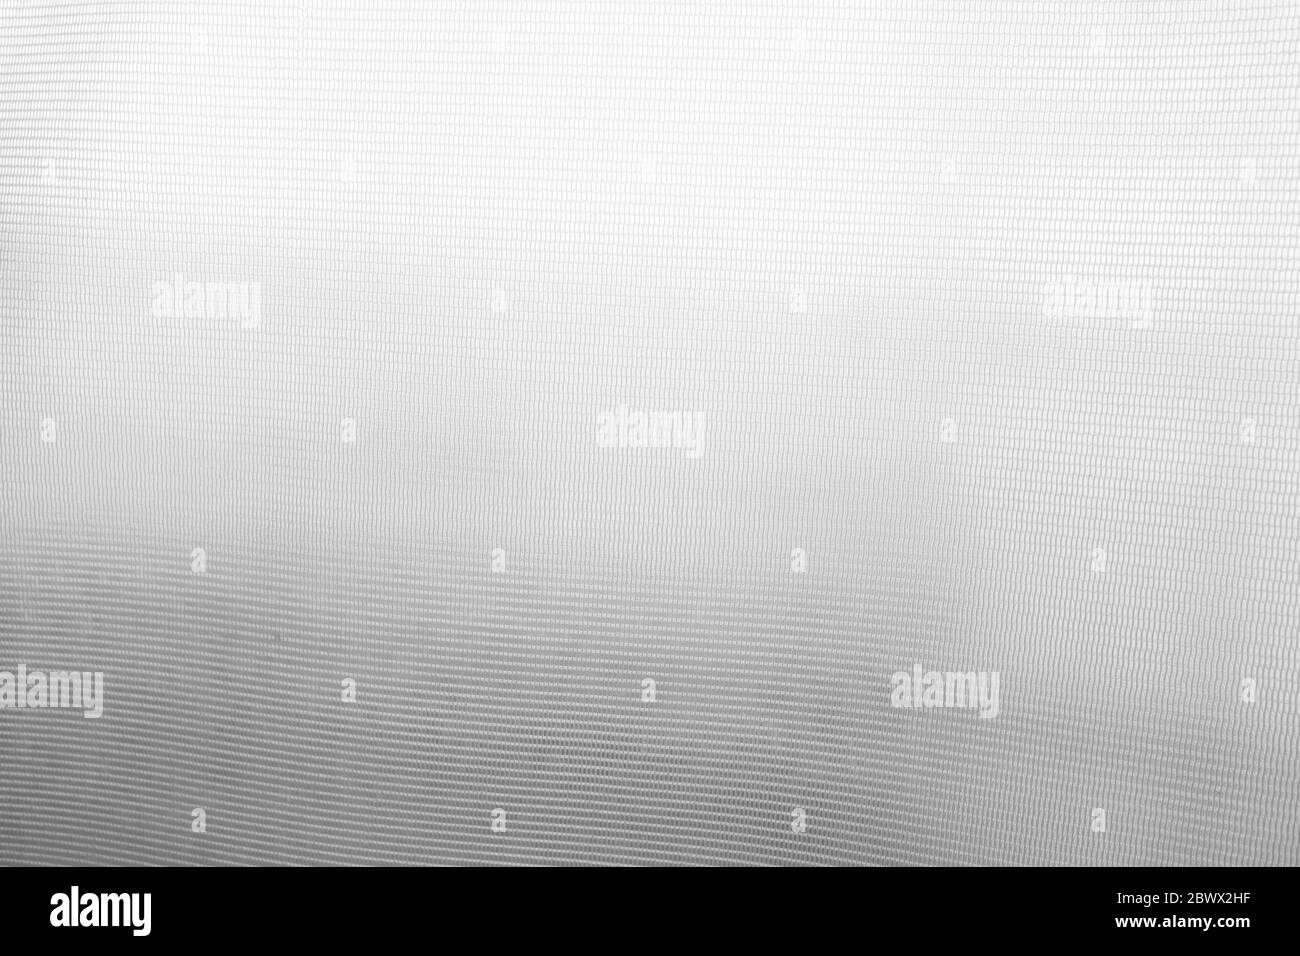 Close up White PVC Curtain Texture Background. Stock Photo